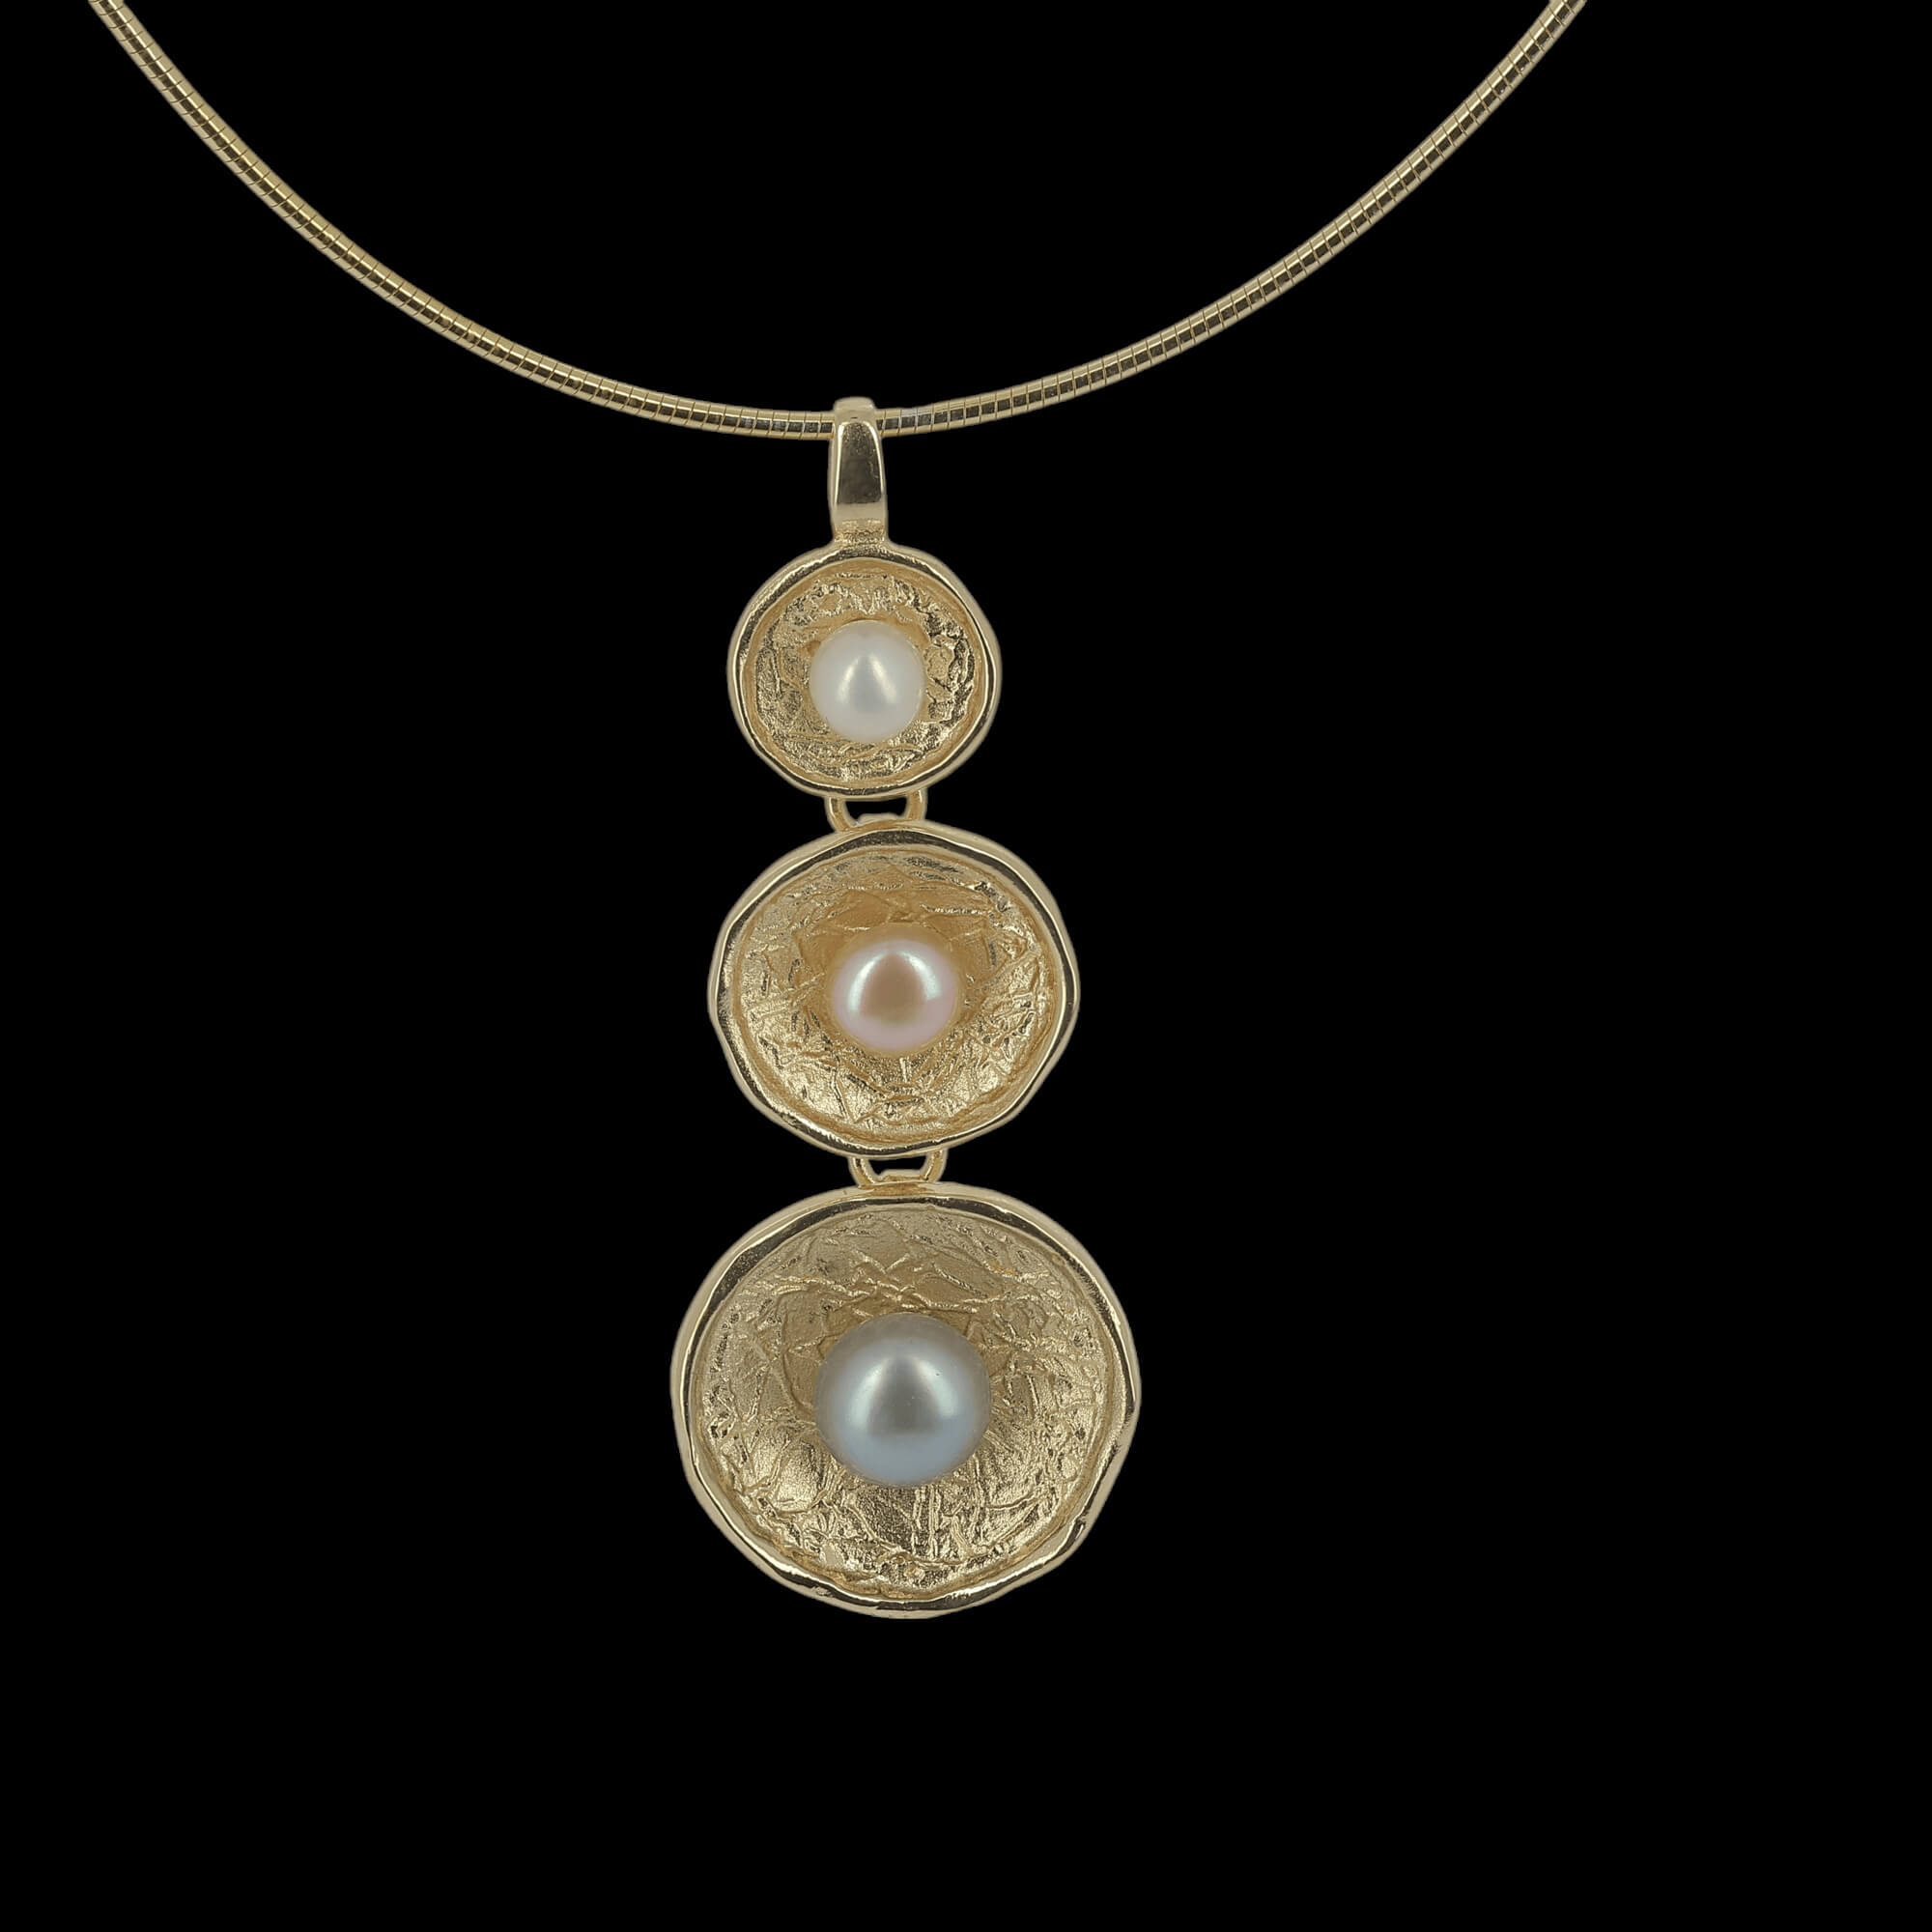 Decorated gold-plated pendant with three colors of pearls